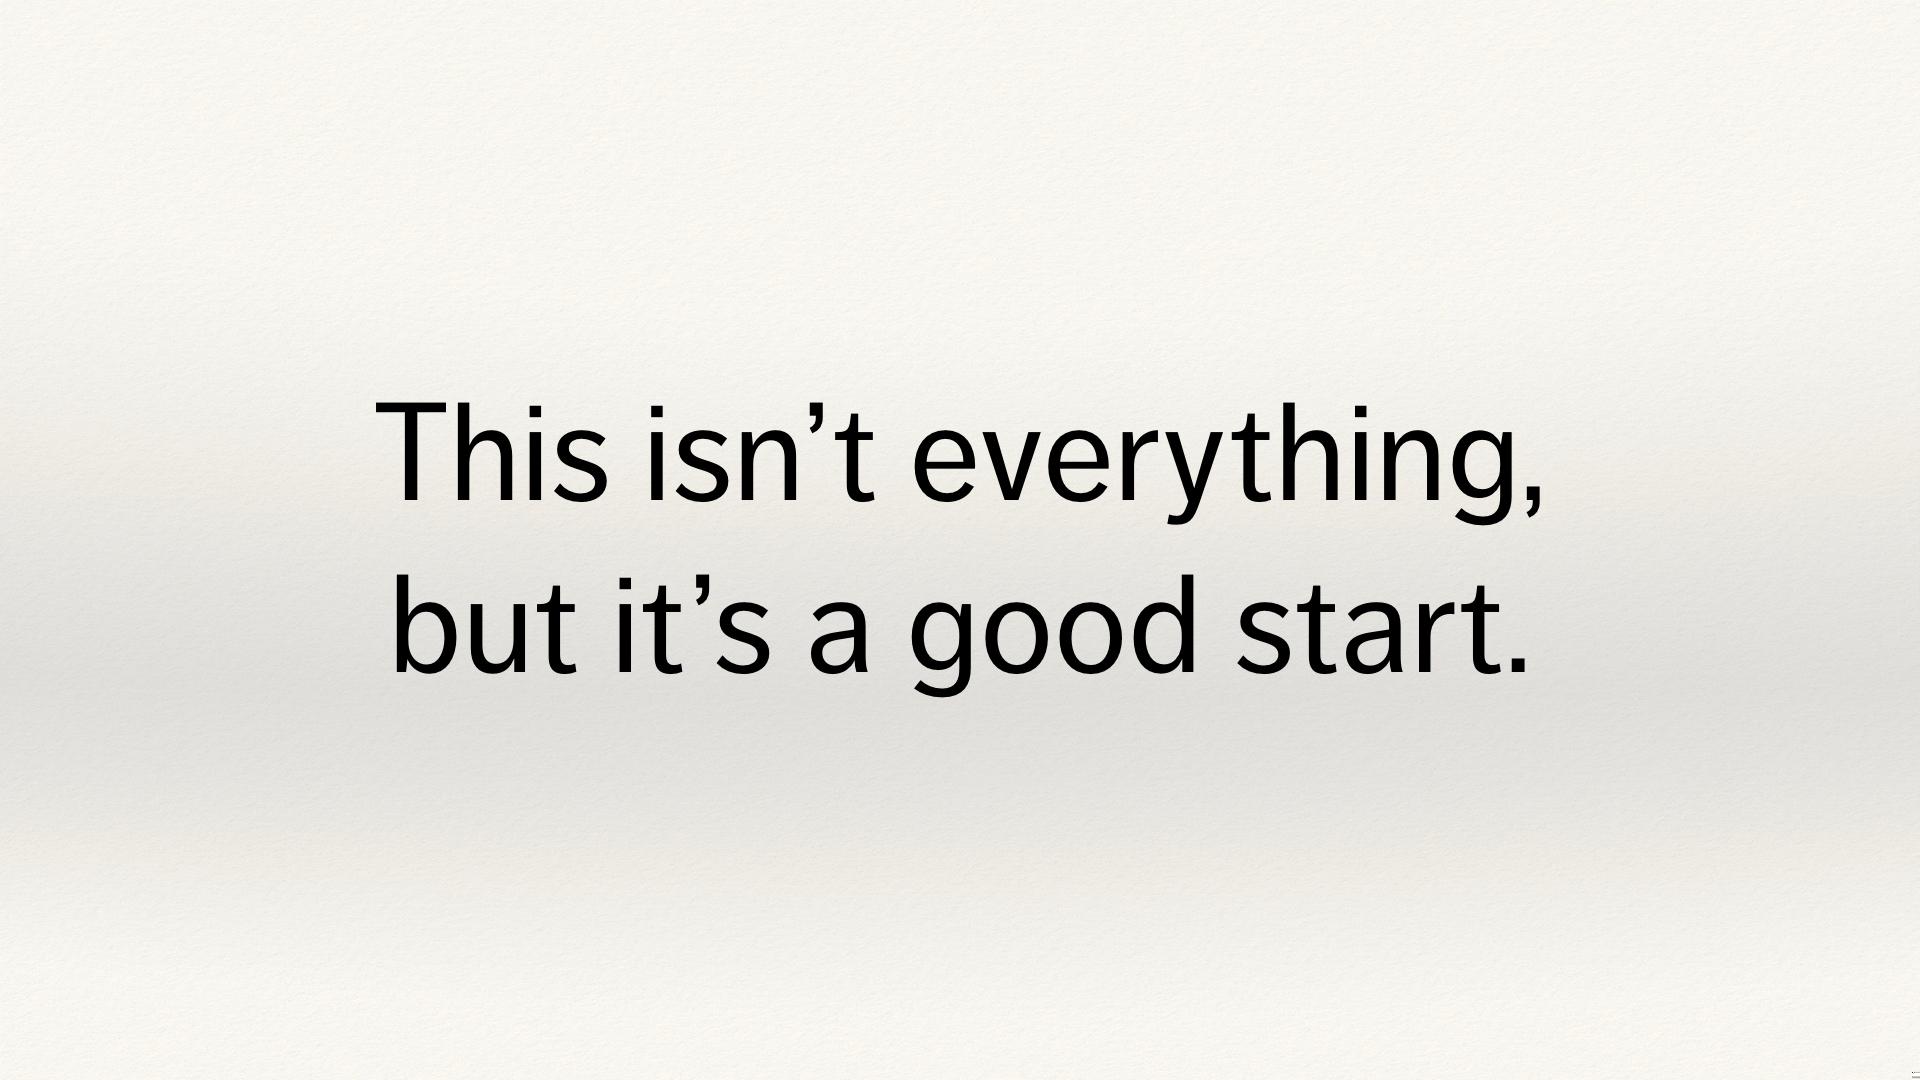 Text slide. “This isn’t everything, but it’s a good start”.